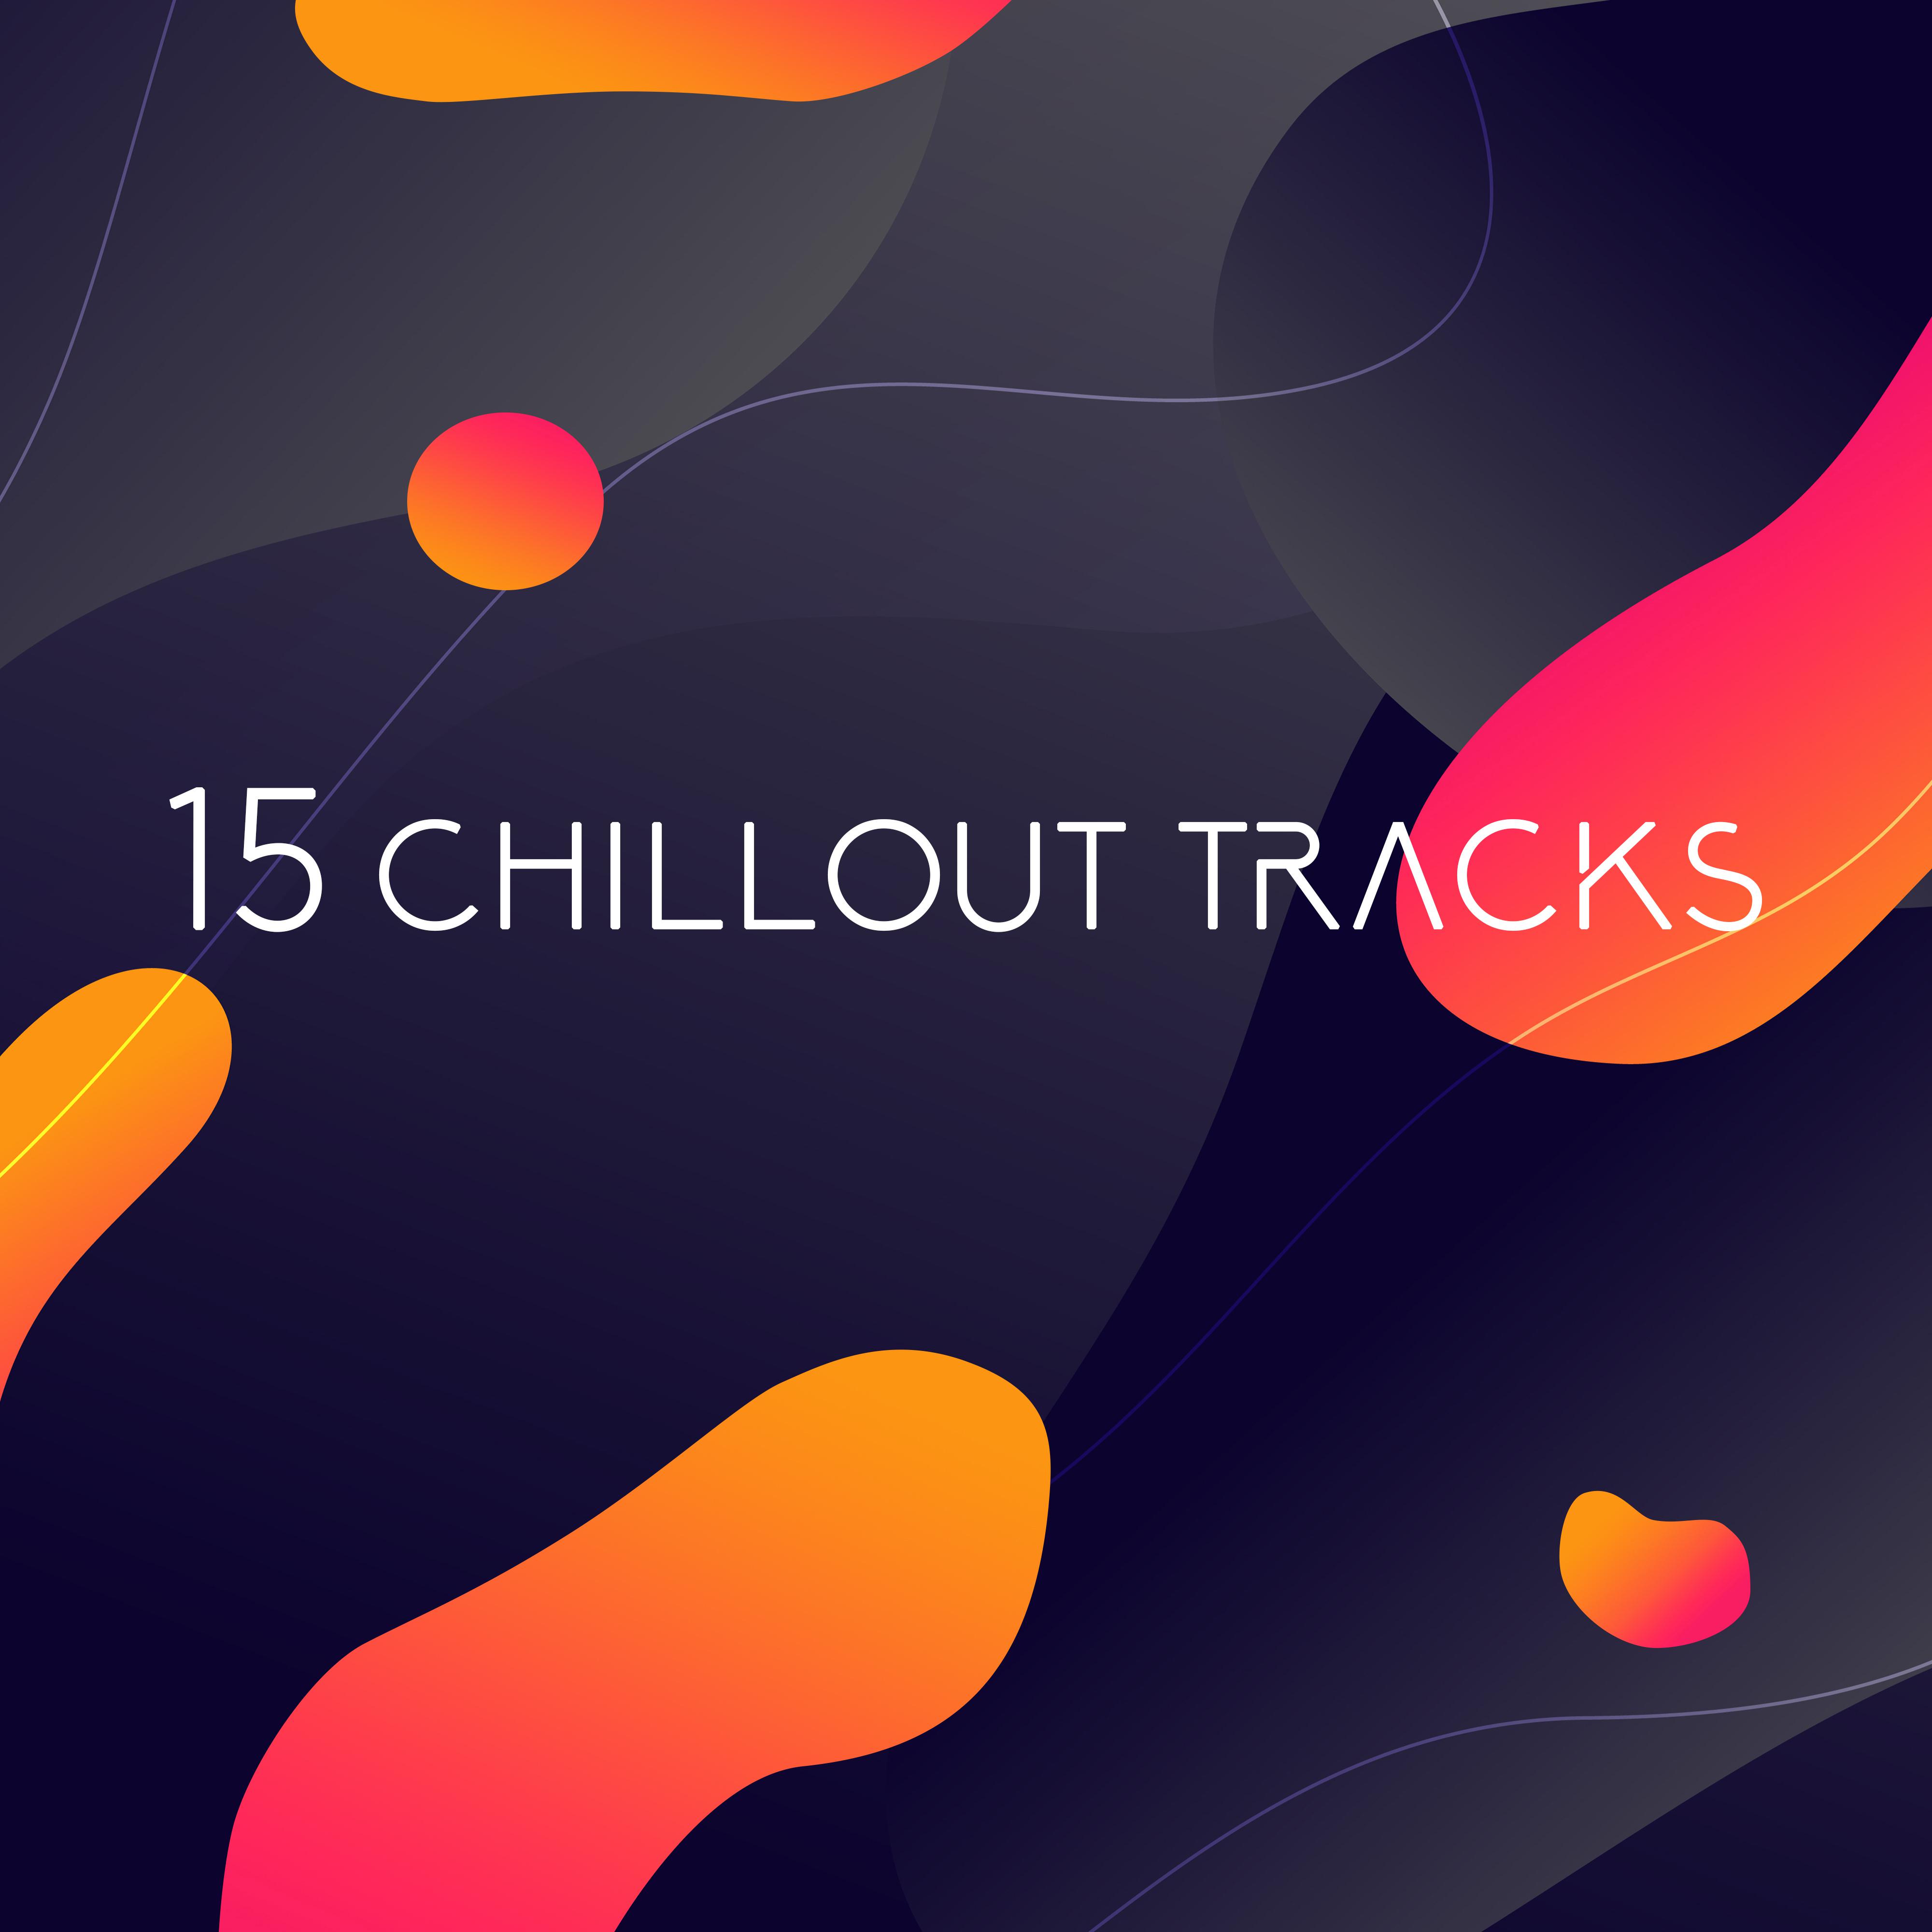 15 Chillout Tracks  Deep Relax, Music Detox, Chilled Lounge House, Street Vibes, Chill Out 2019